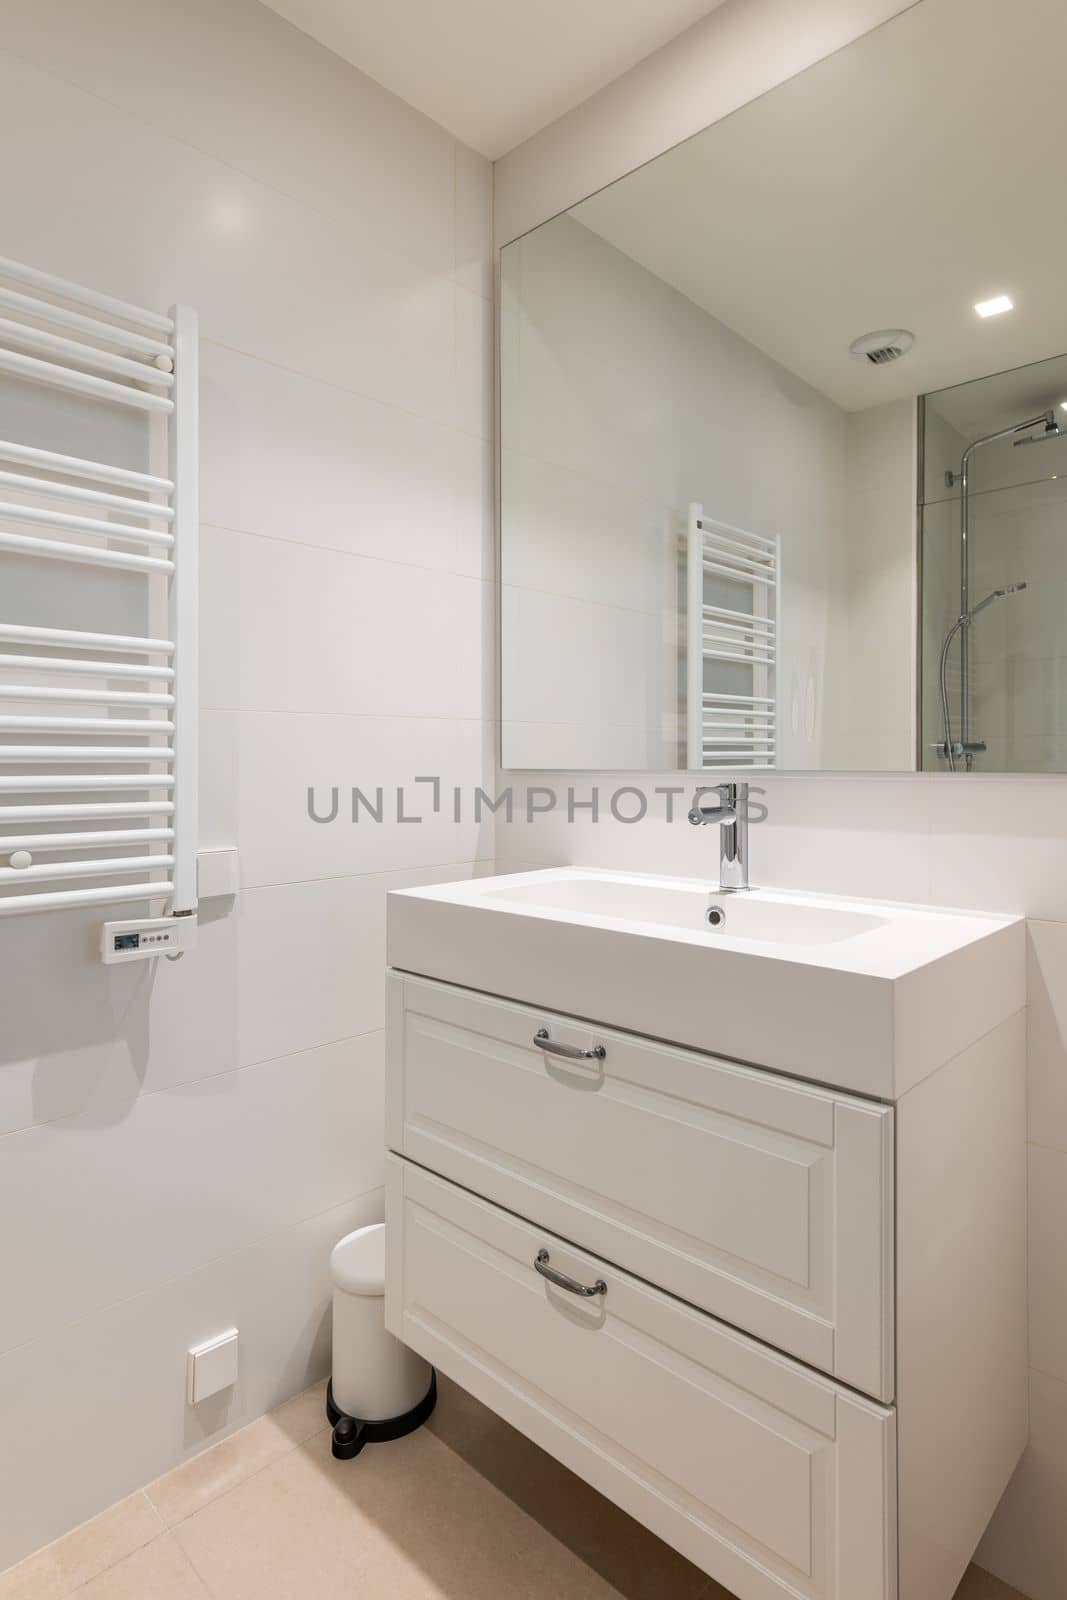 Spacious bright bathroom has washbasin with tap built into nightstand, large mirror that reflects shower cabin on opposite side of room and heating radiator for drying towels. by apavlin